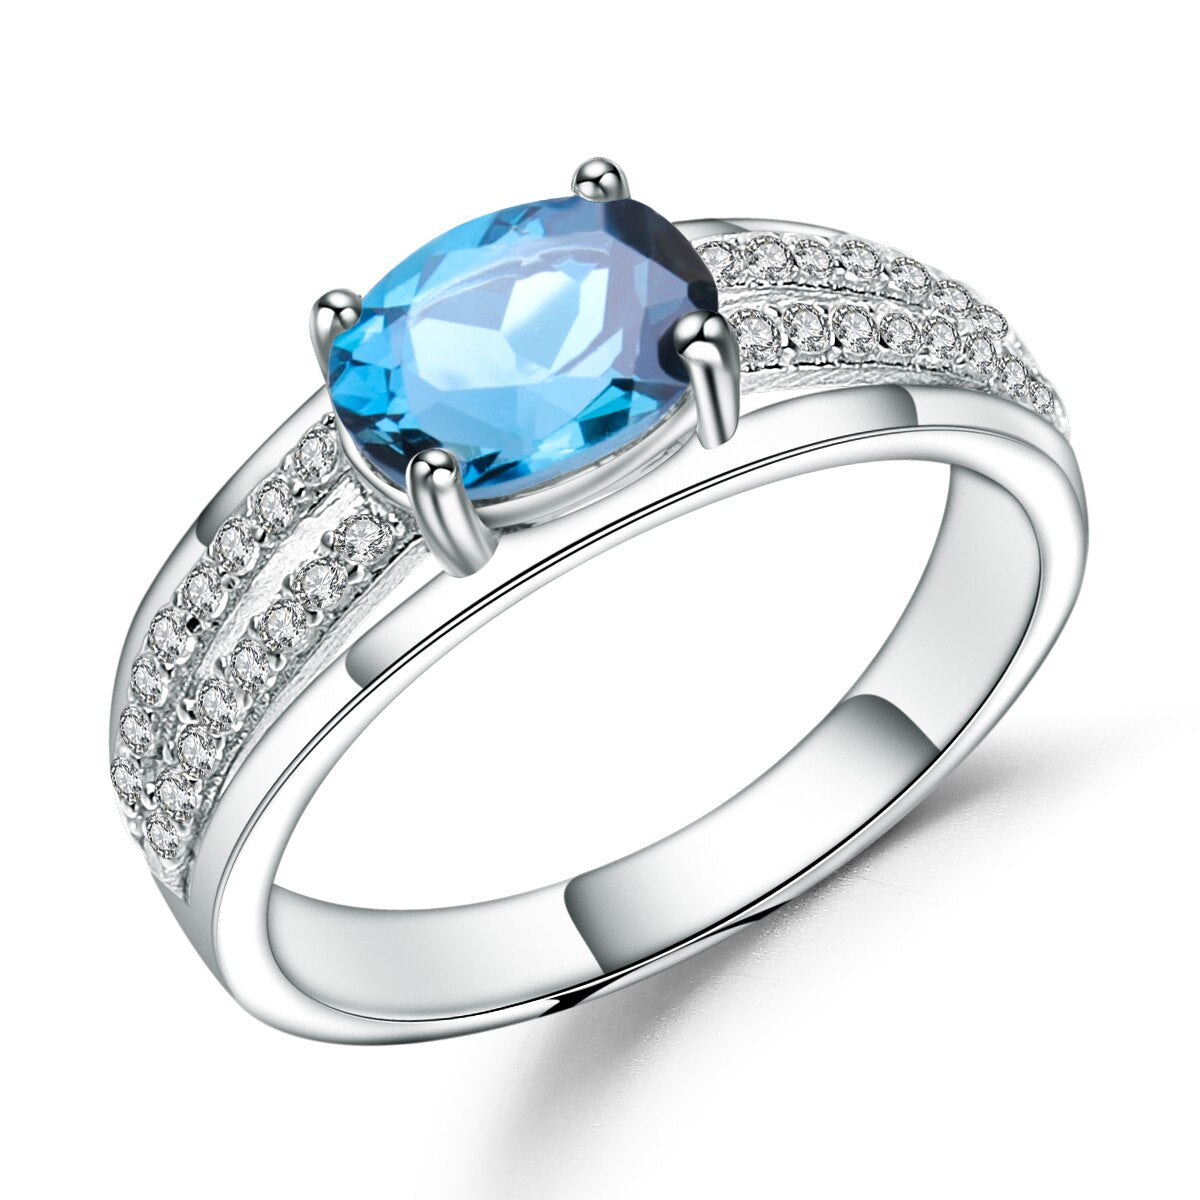 GEM&#39;S BALLET 1.66Ct Oval Natural Blue Sapphire Gemstone Ring 925 Sterling Silver Wedding Rings for Women Classic Fine Jewelry London Blue Topaz|925 Sterling Silver